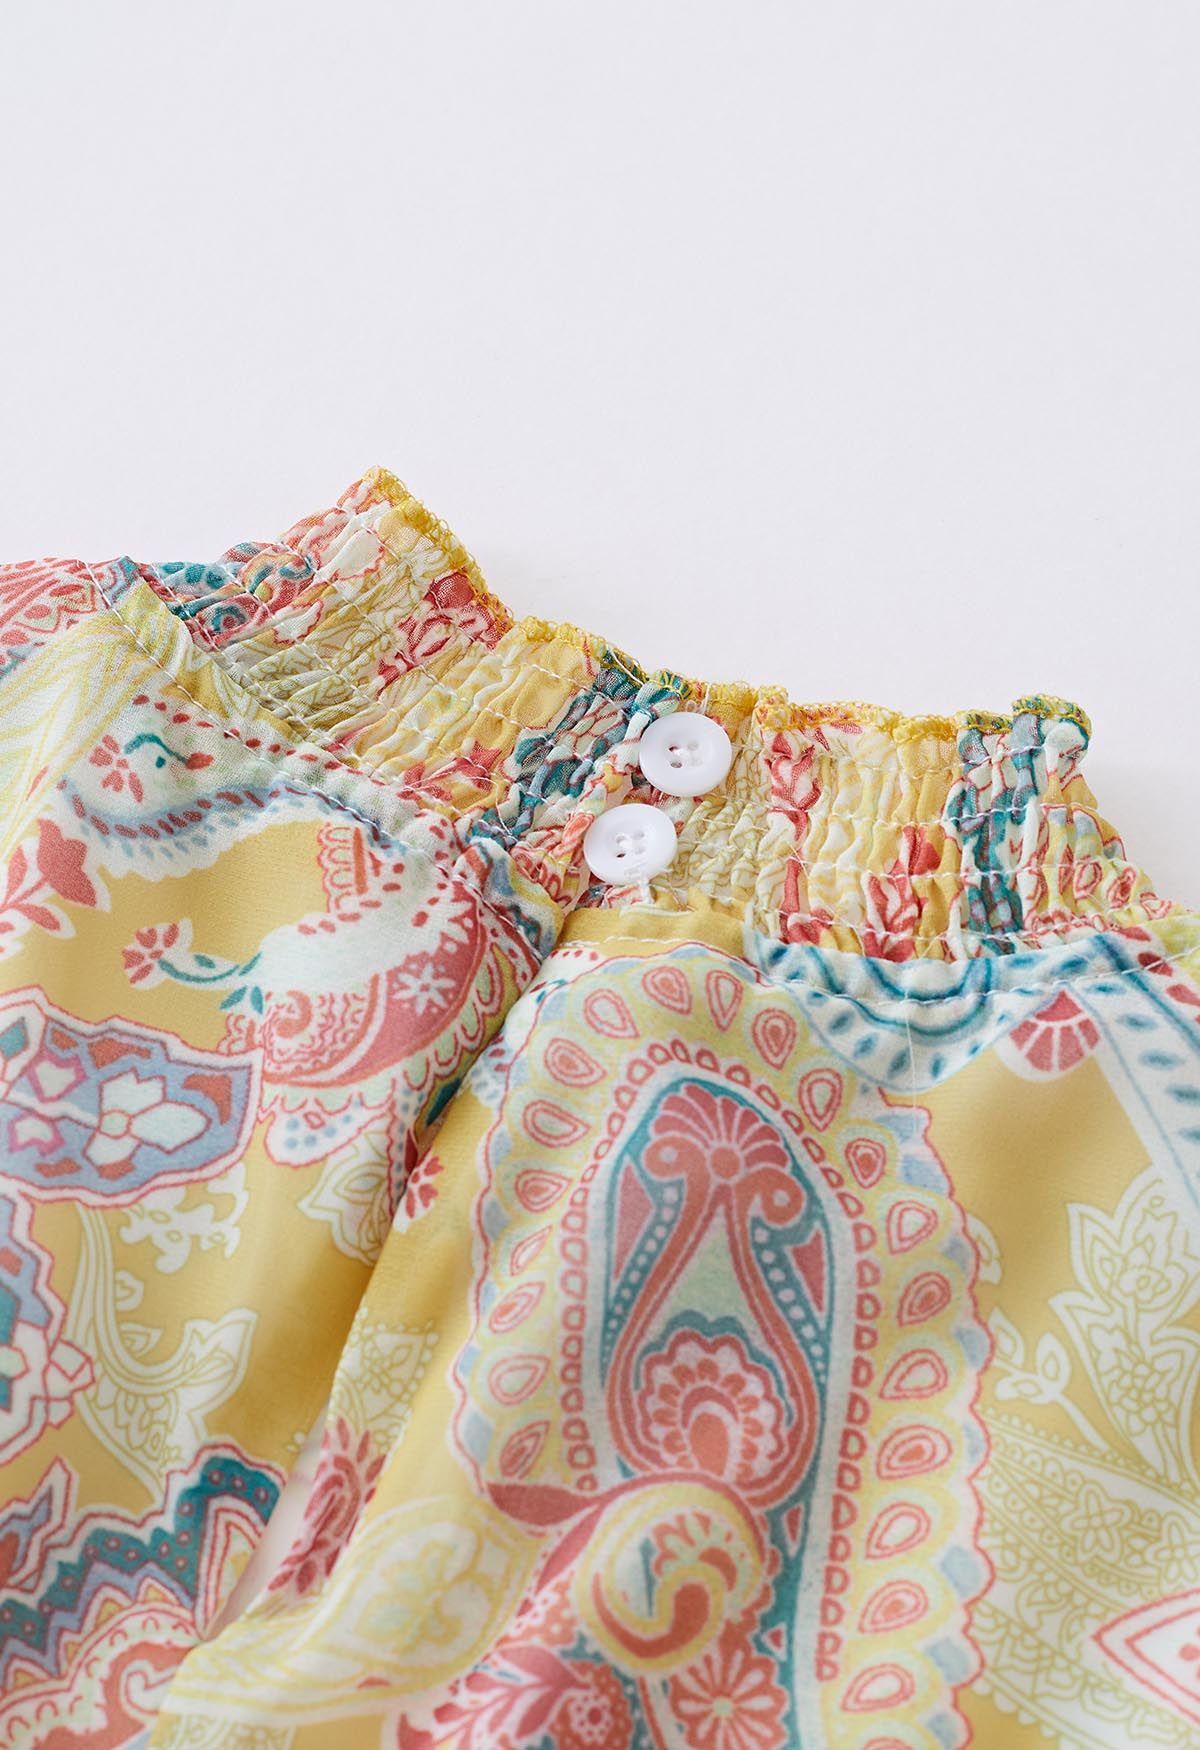 Paisley Printed Belted Tiered Chiffon Dress in Yellow - Retro, Indie ...